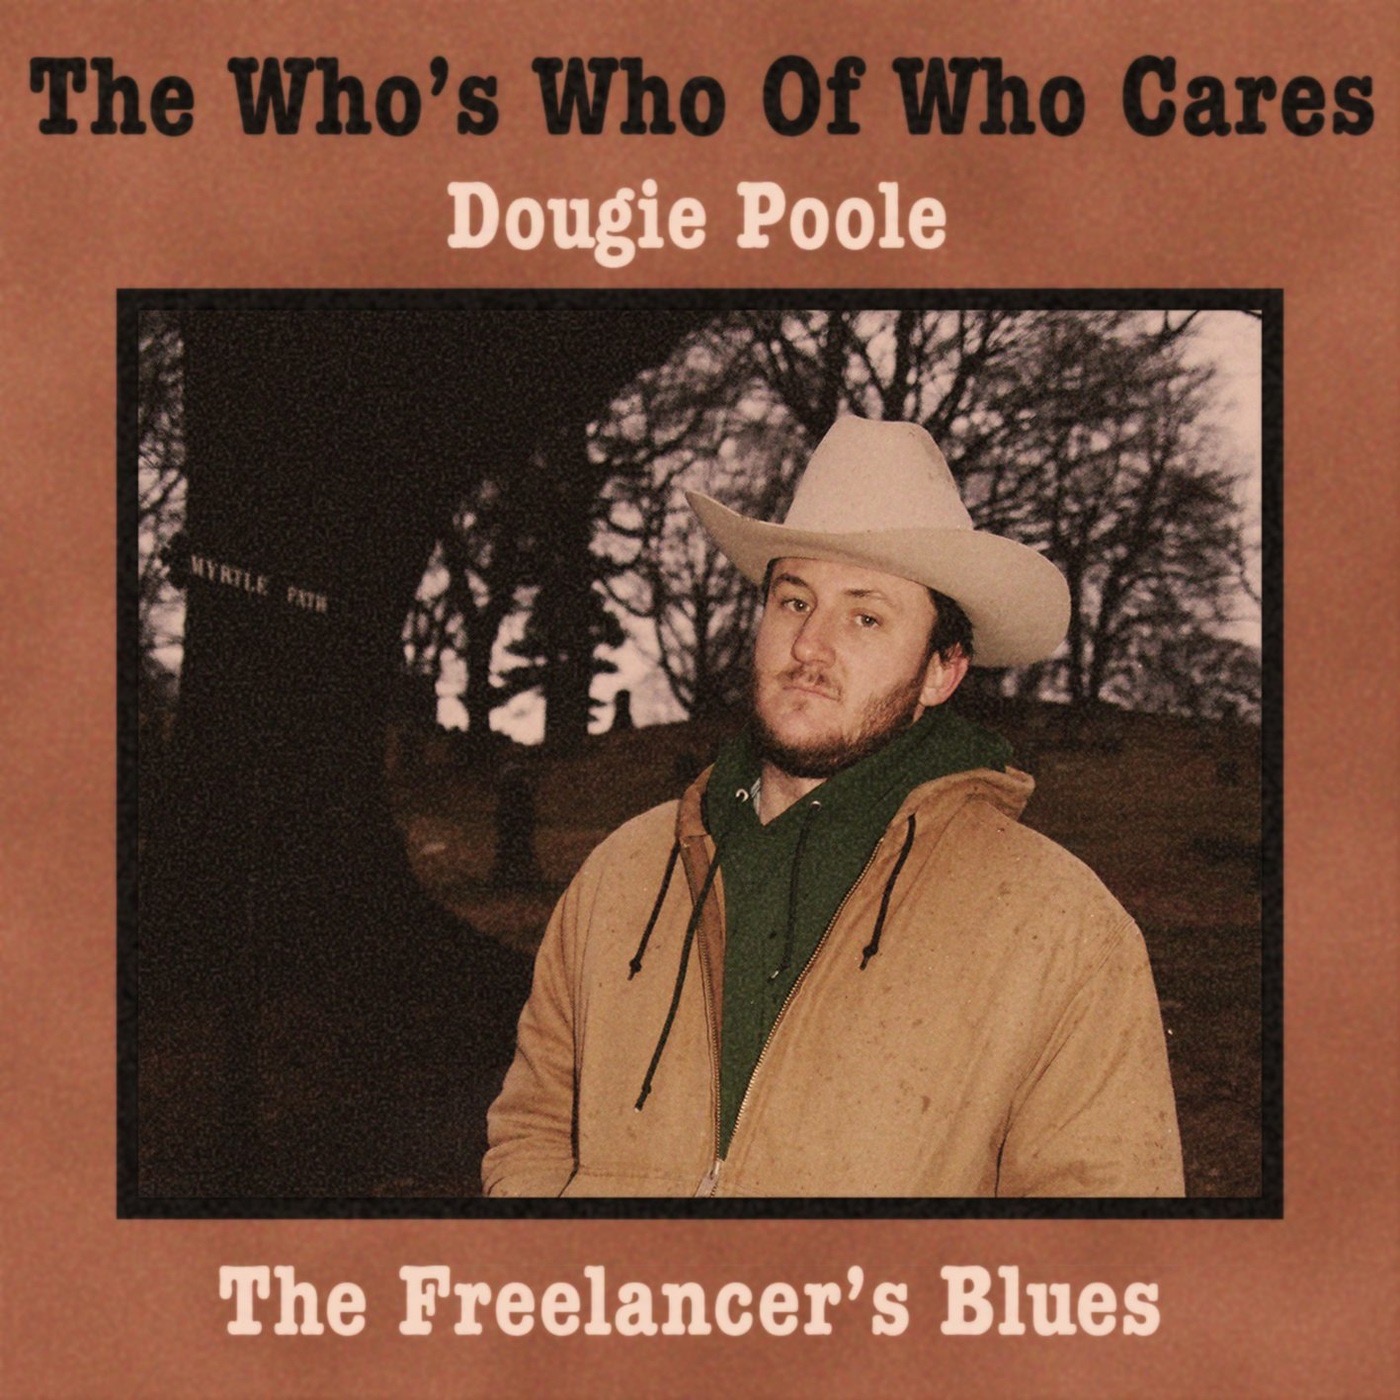 Dougie Poole - The Who's Who of Who Cares